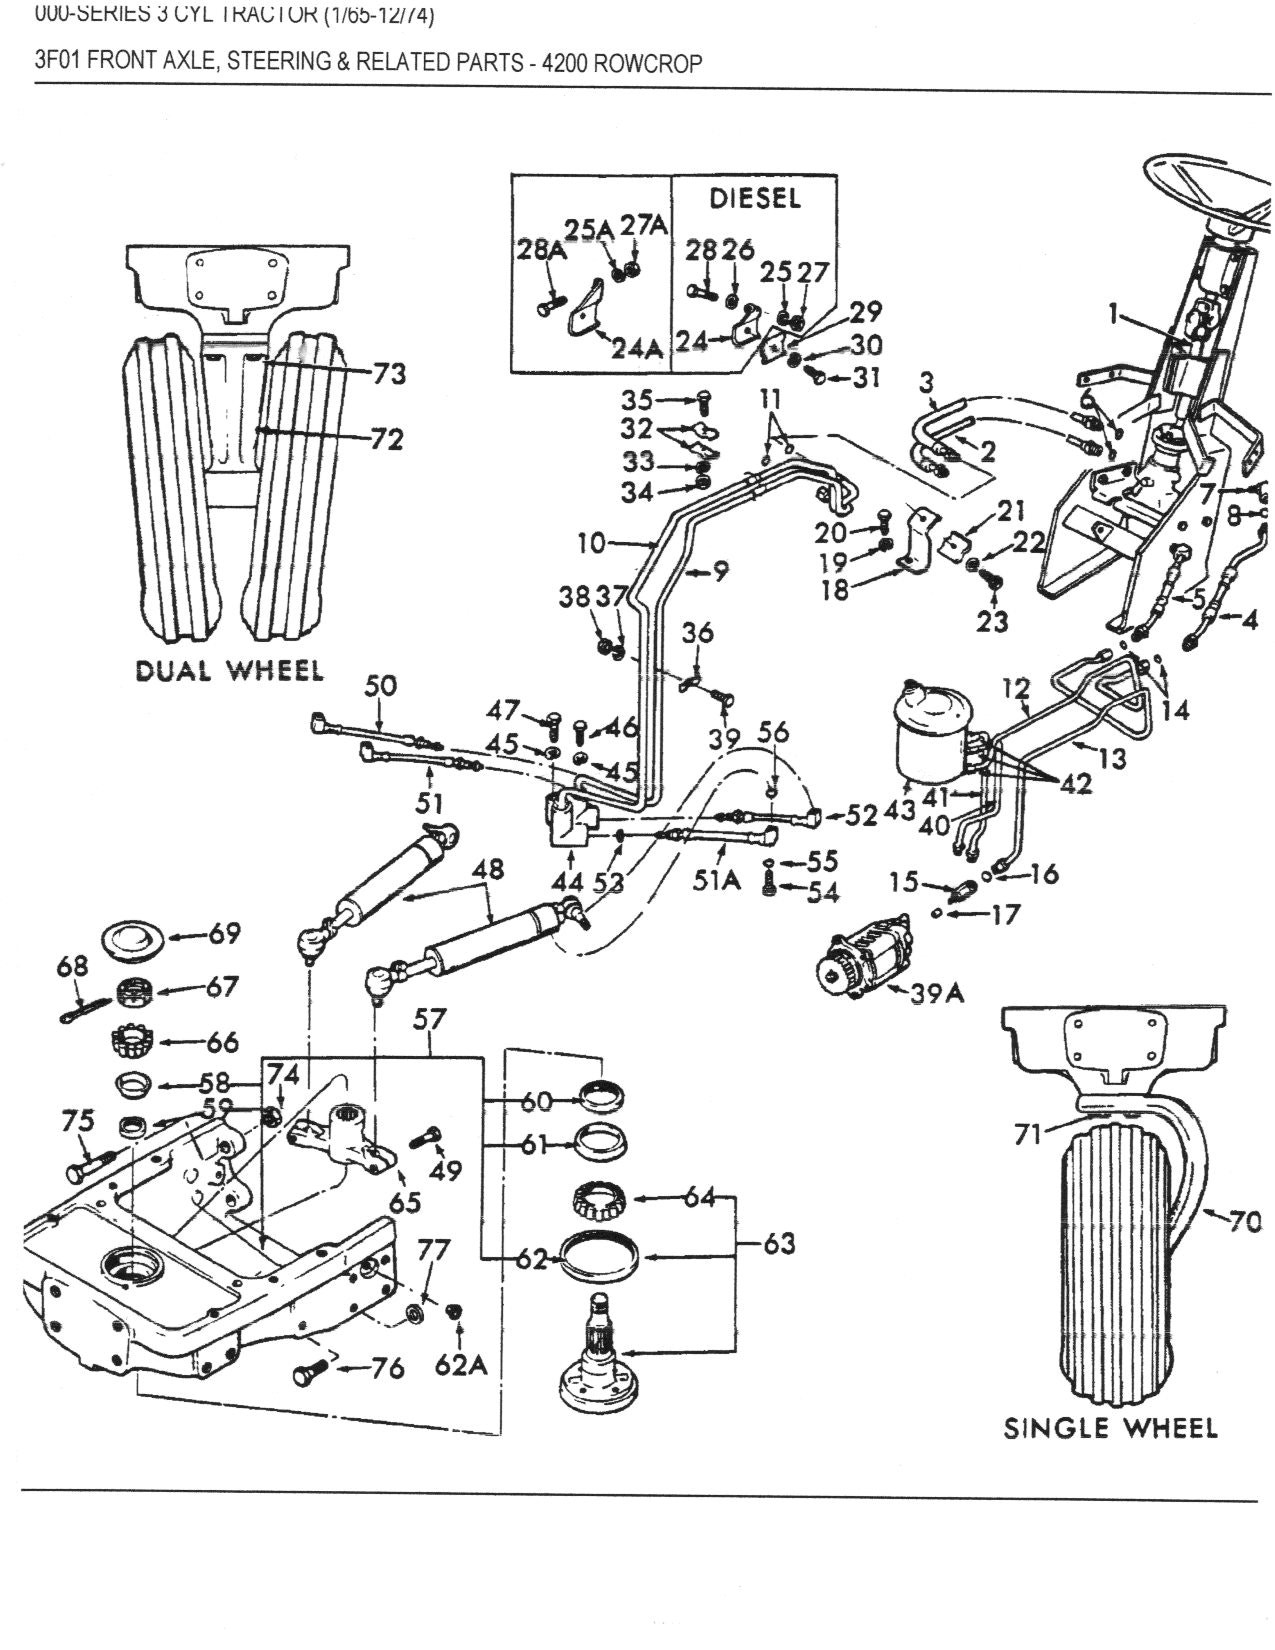 Hydraulic Steering Diagram ford Tractor Parts Diagram Famous Picture Power Steering Overflowing Of Hydraulic Steering Diagram